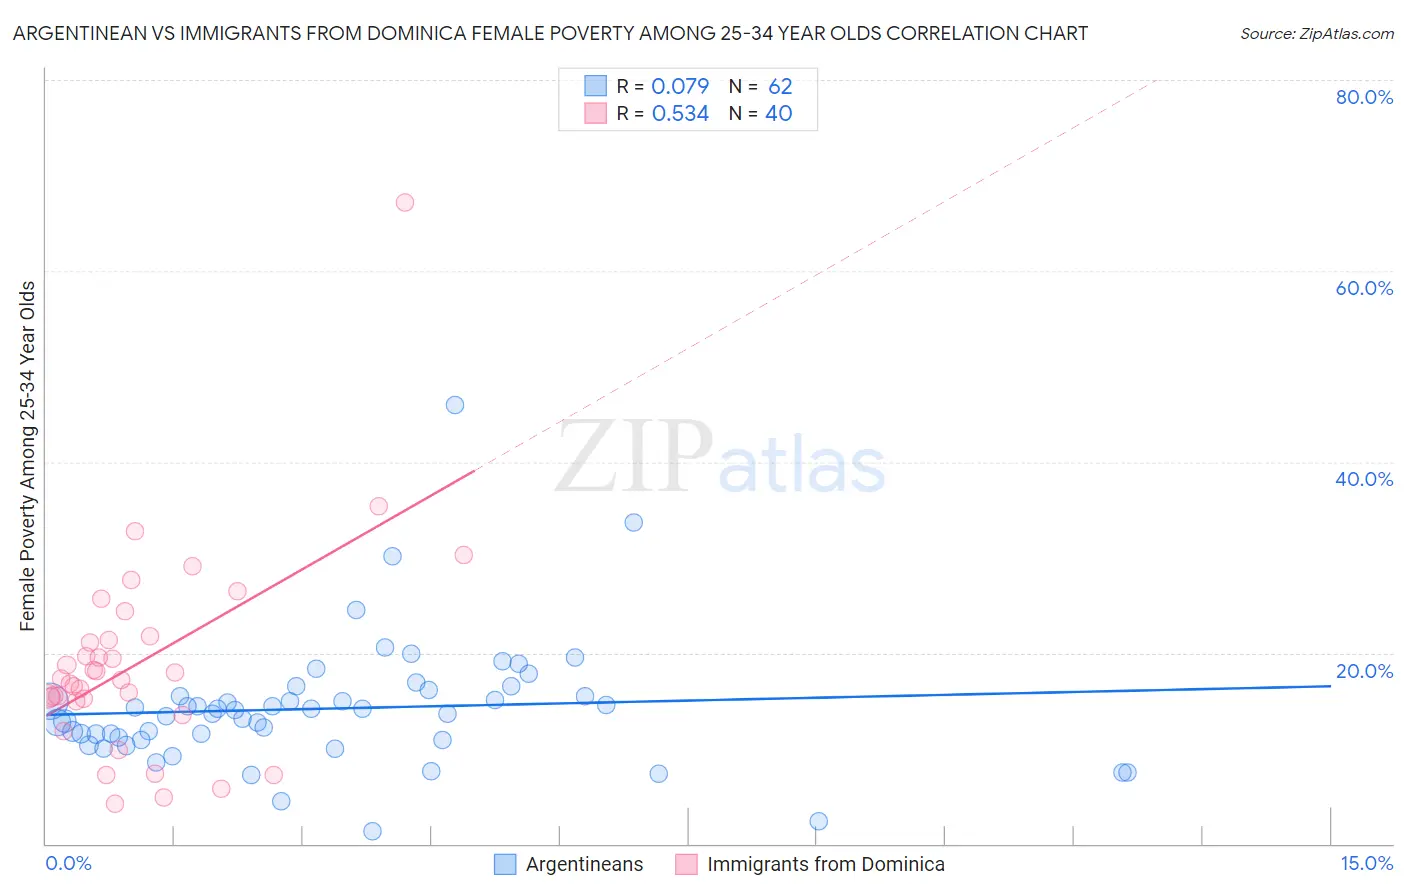 Argentinean vs Immigrants from Dominica Female Poverty Among 25-34 Year Olds